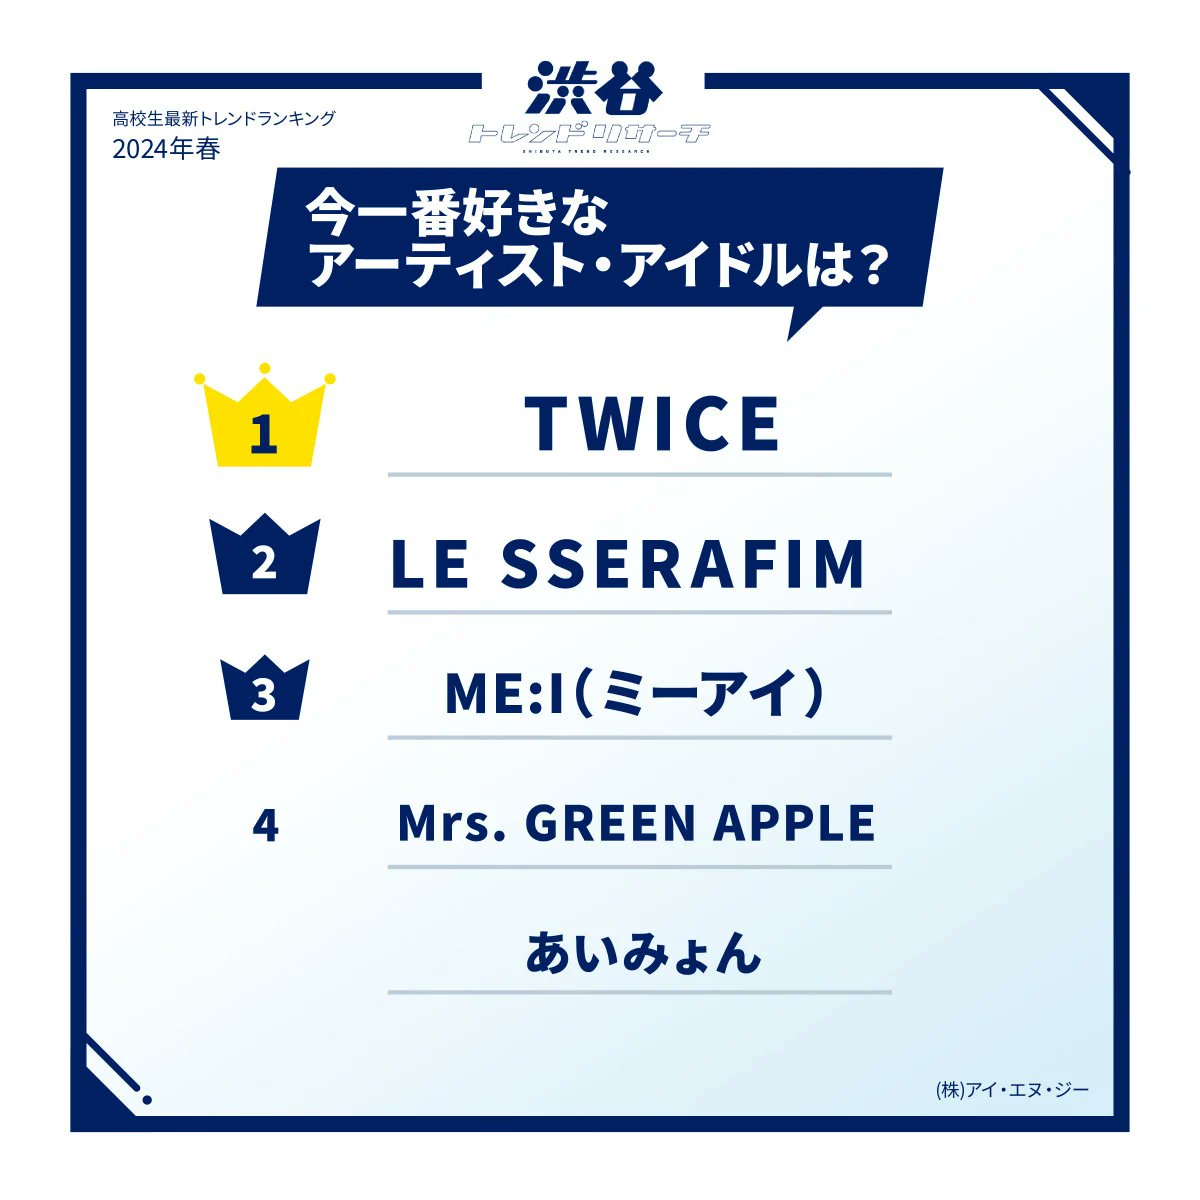 TWICE ranked #1 for 'Current Favorite Artists' among high school students in Japan in a survey conducted by Shibuya Trend Research!